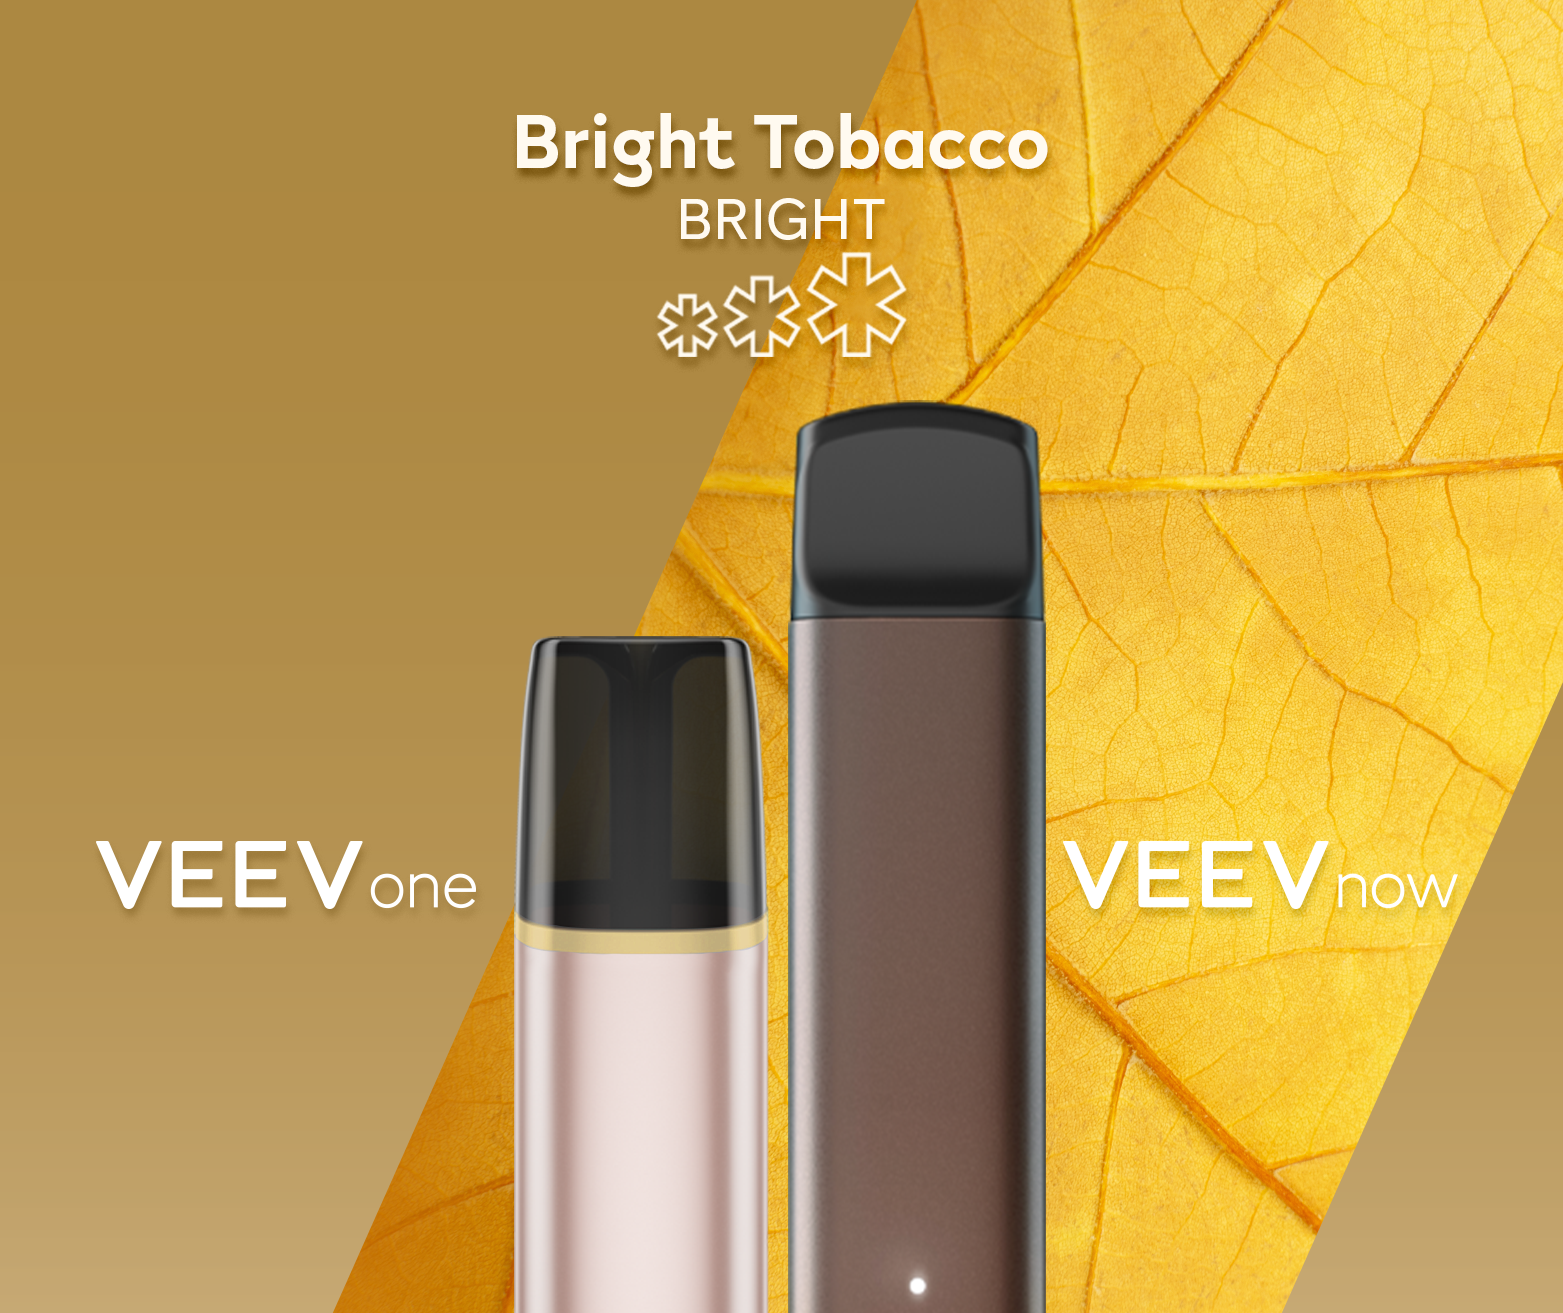 A VEEV ONE pod device and VEEV NOW disposable, both in Bright Tobacco flavour.